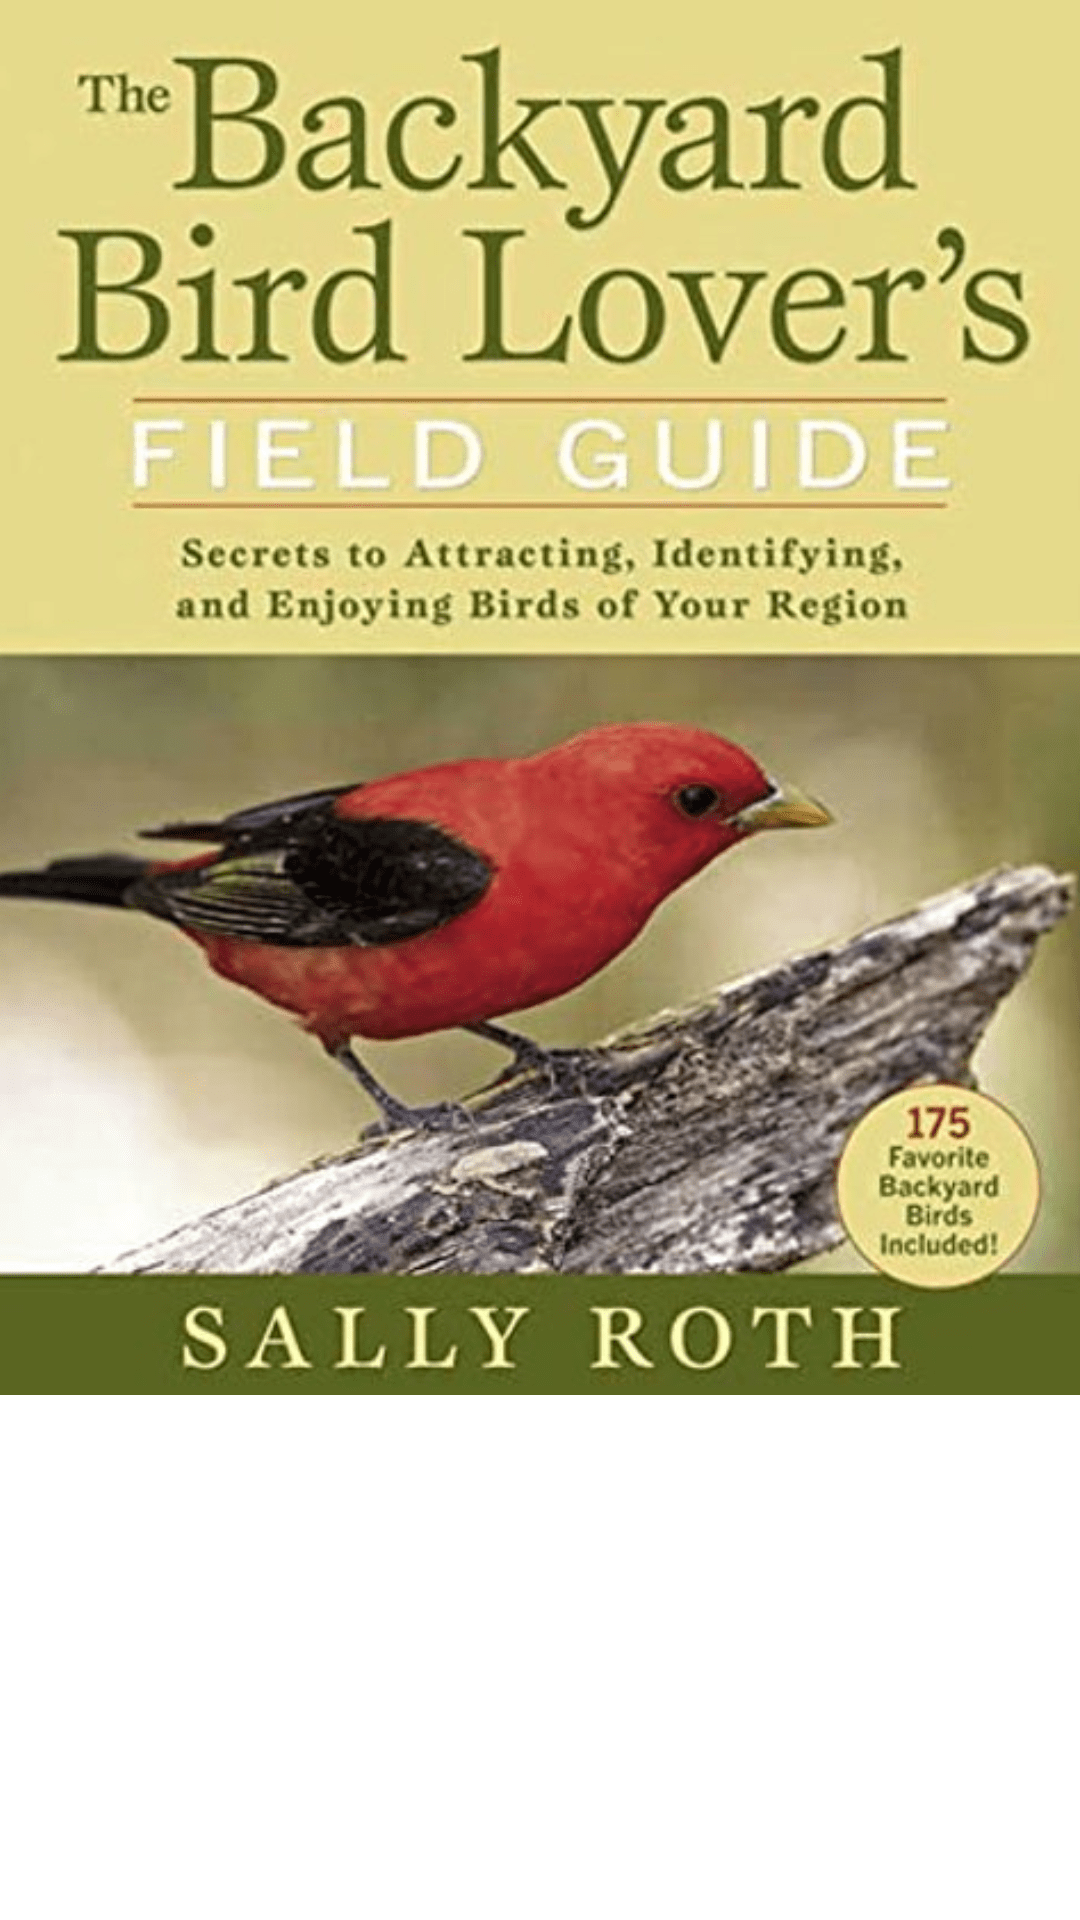 The Backyard Bird Lover's Field Guide: Secrets to Attracting, Identifying, and Enjoying Birds of Your Region